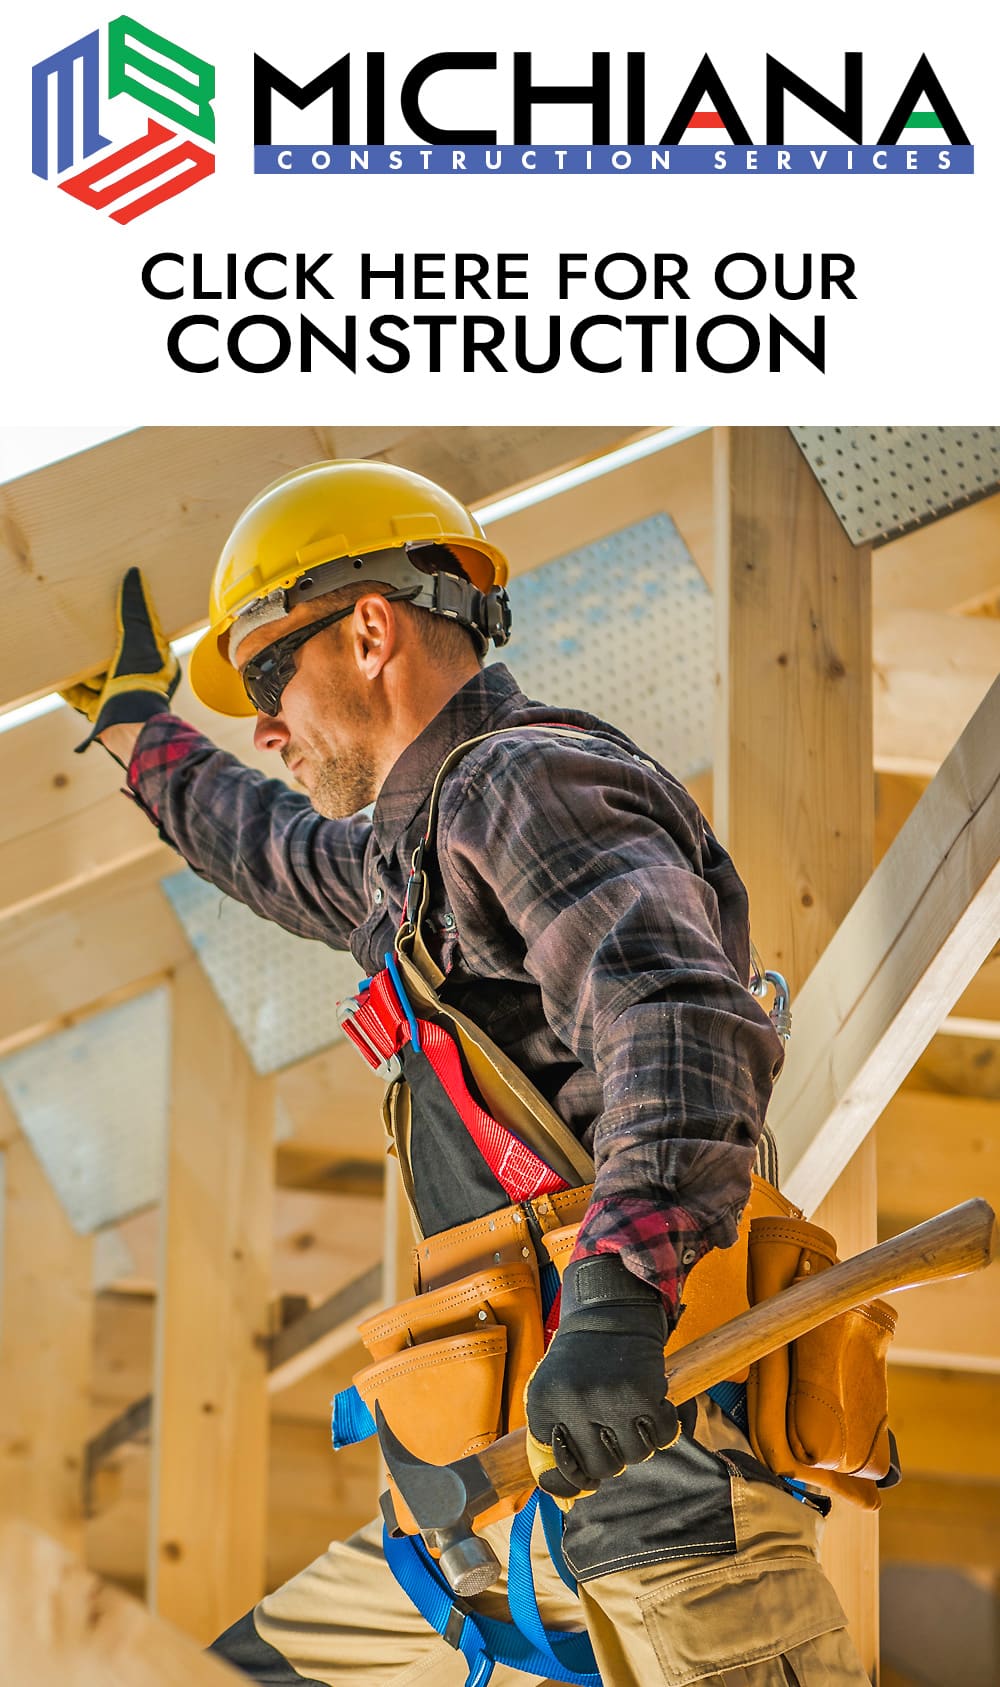 Michiana-Building-Services-Landing-Page-CONSTRUCTION-NEW-NEW-NEWEST.jpg